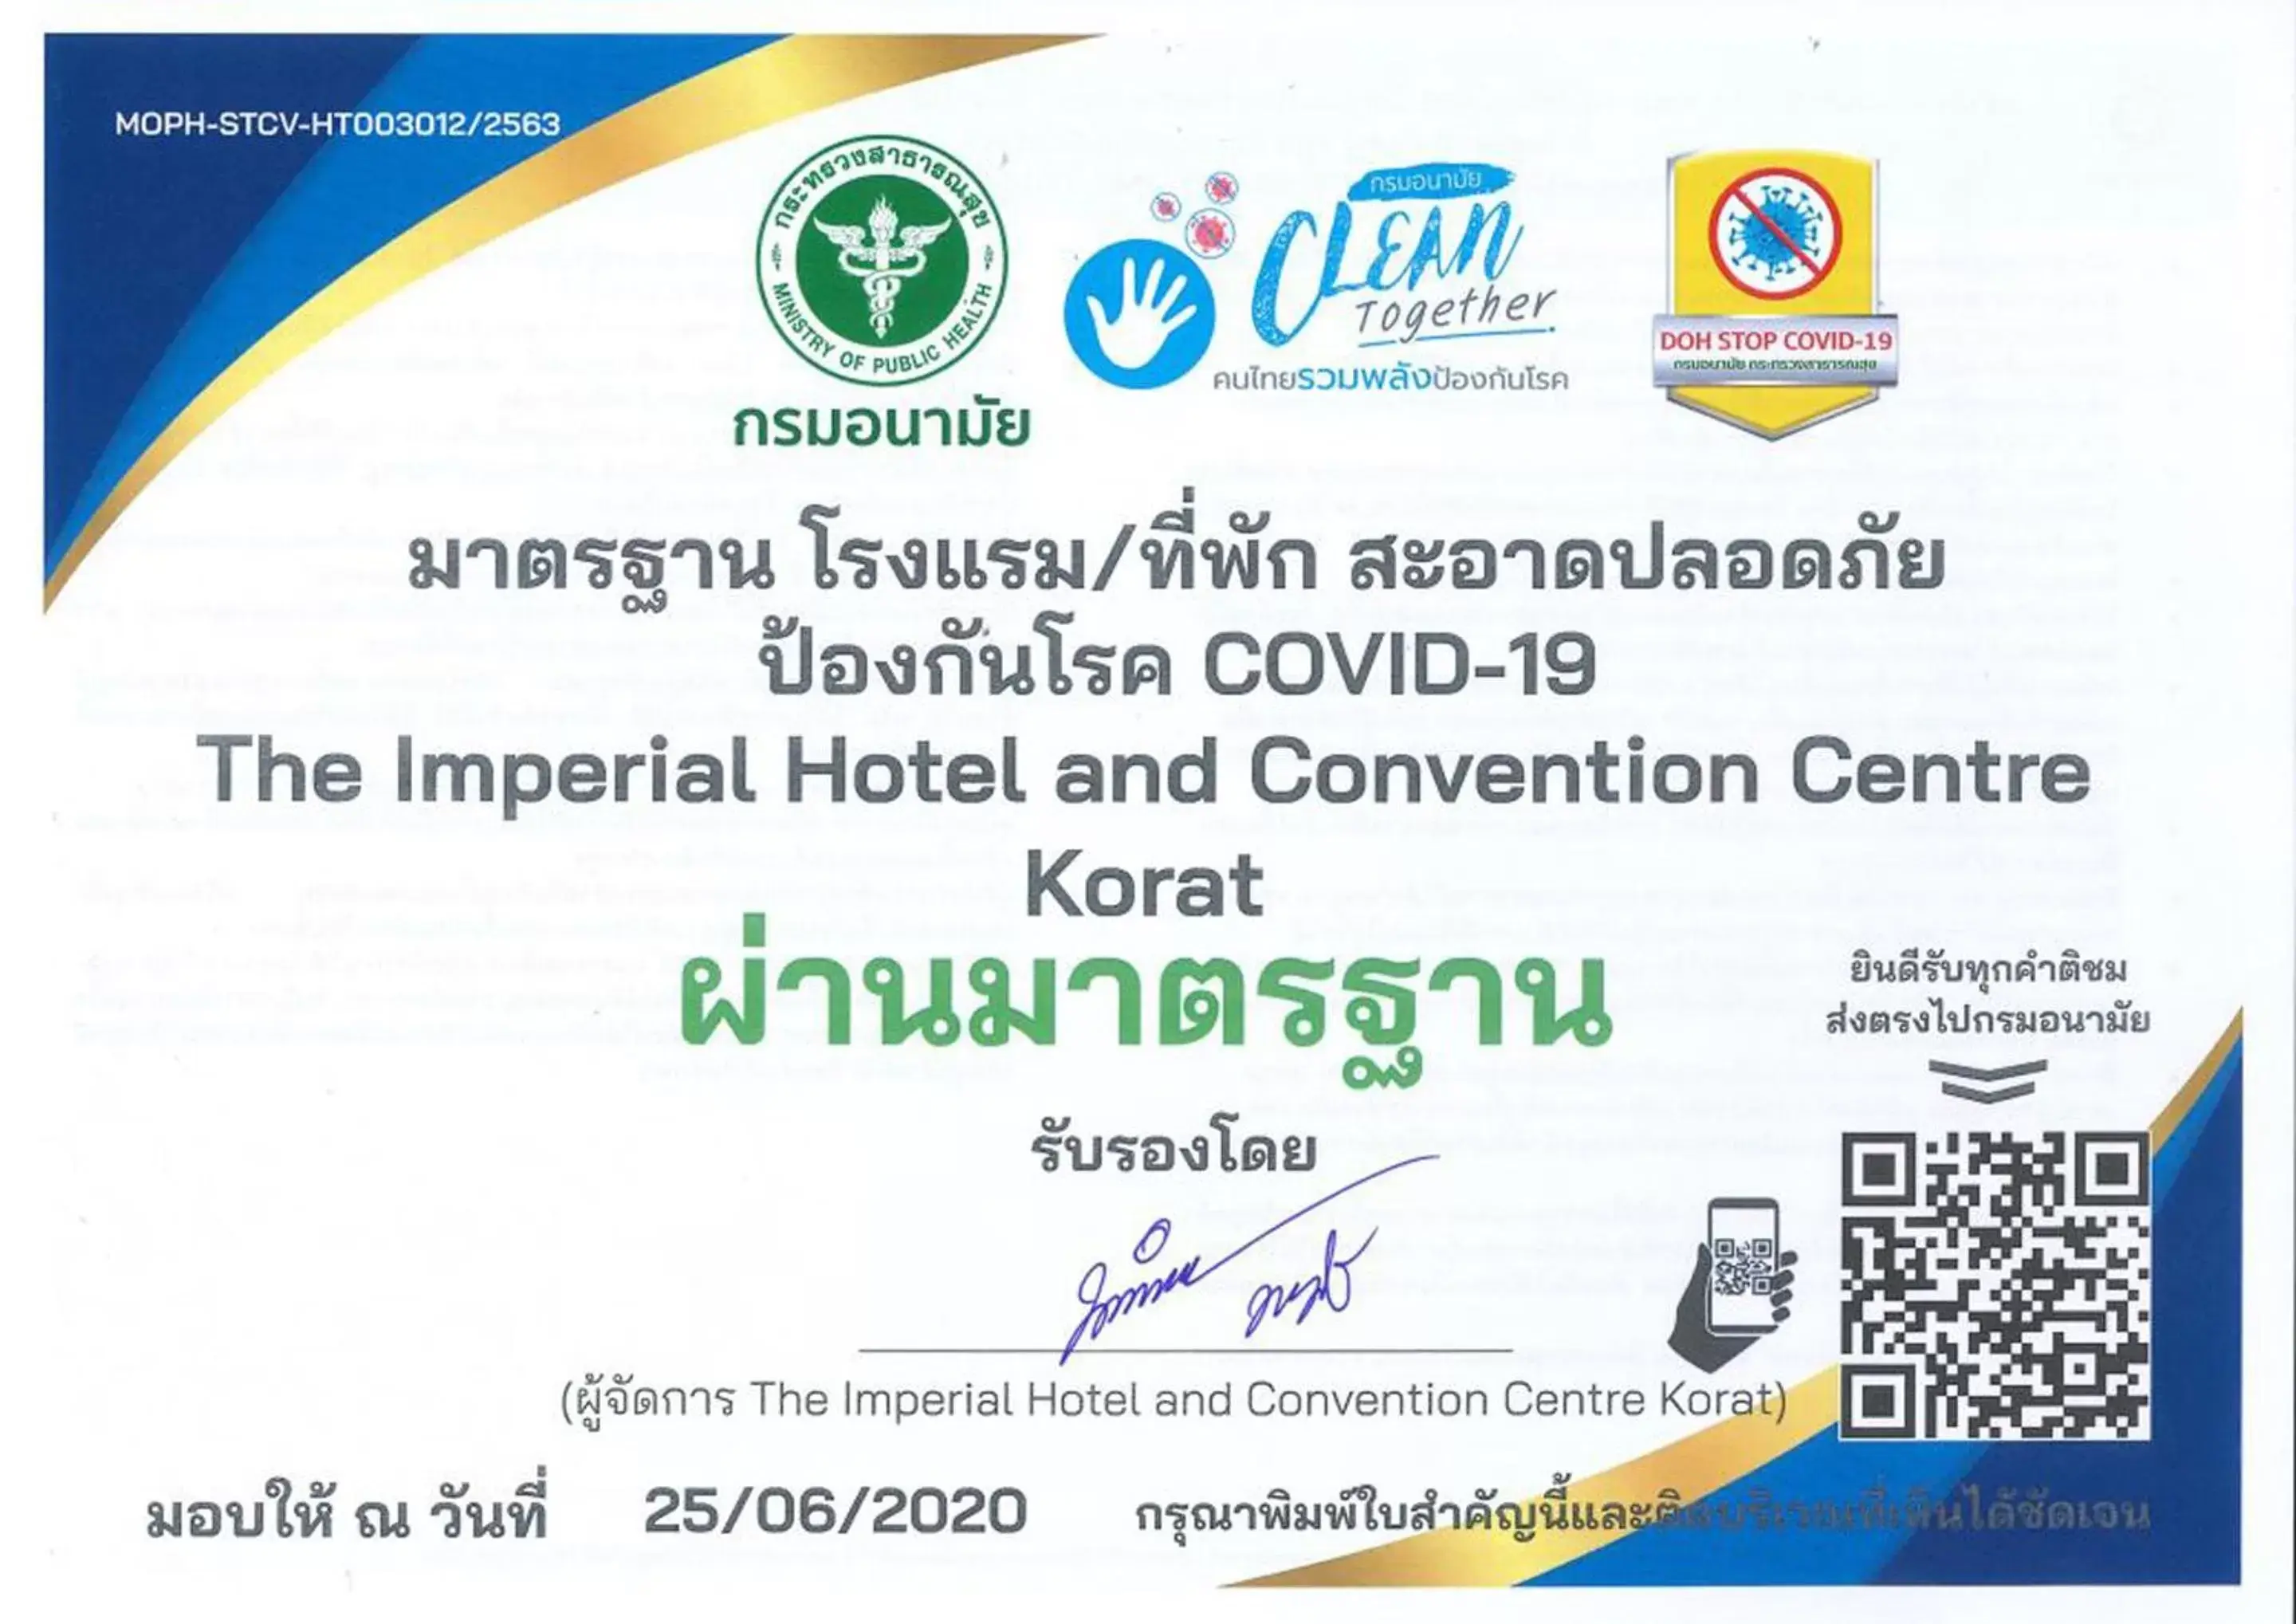 Certificate/Award in The Imperial Hotel & Convention Centre Korat